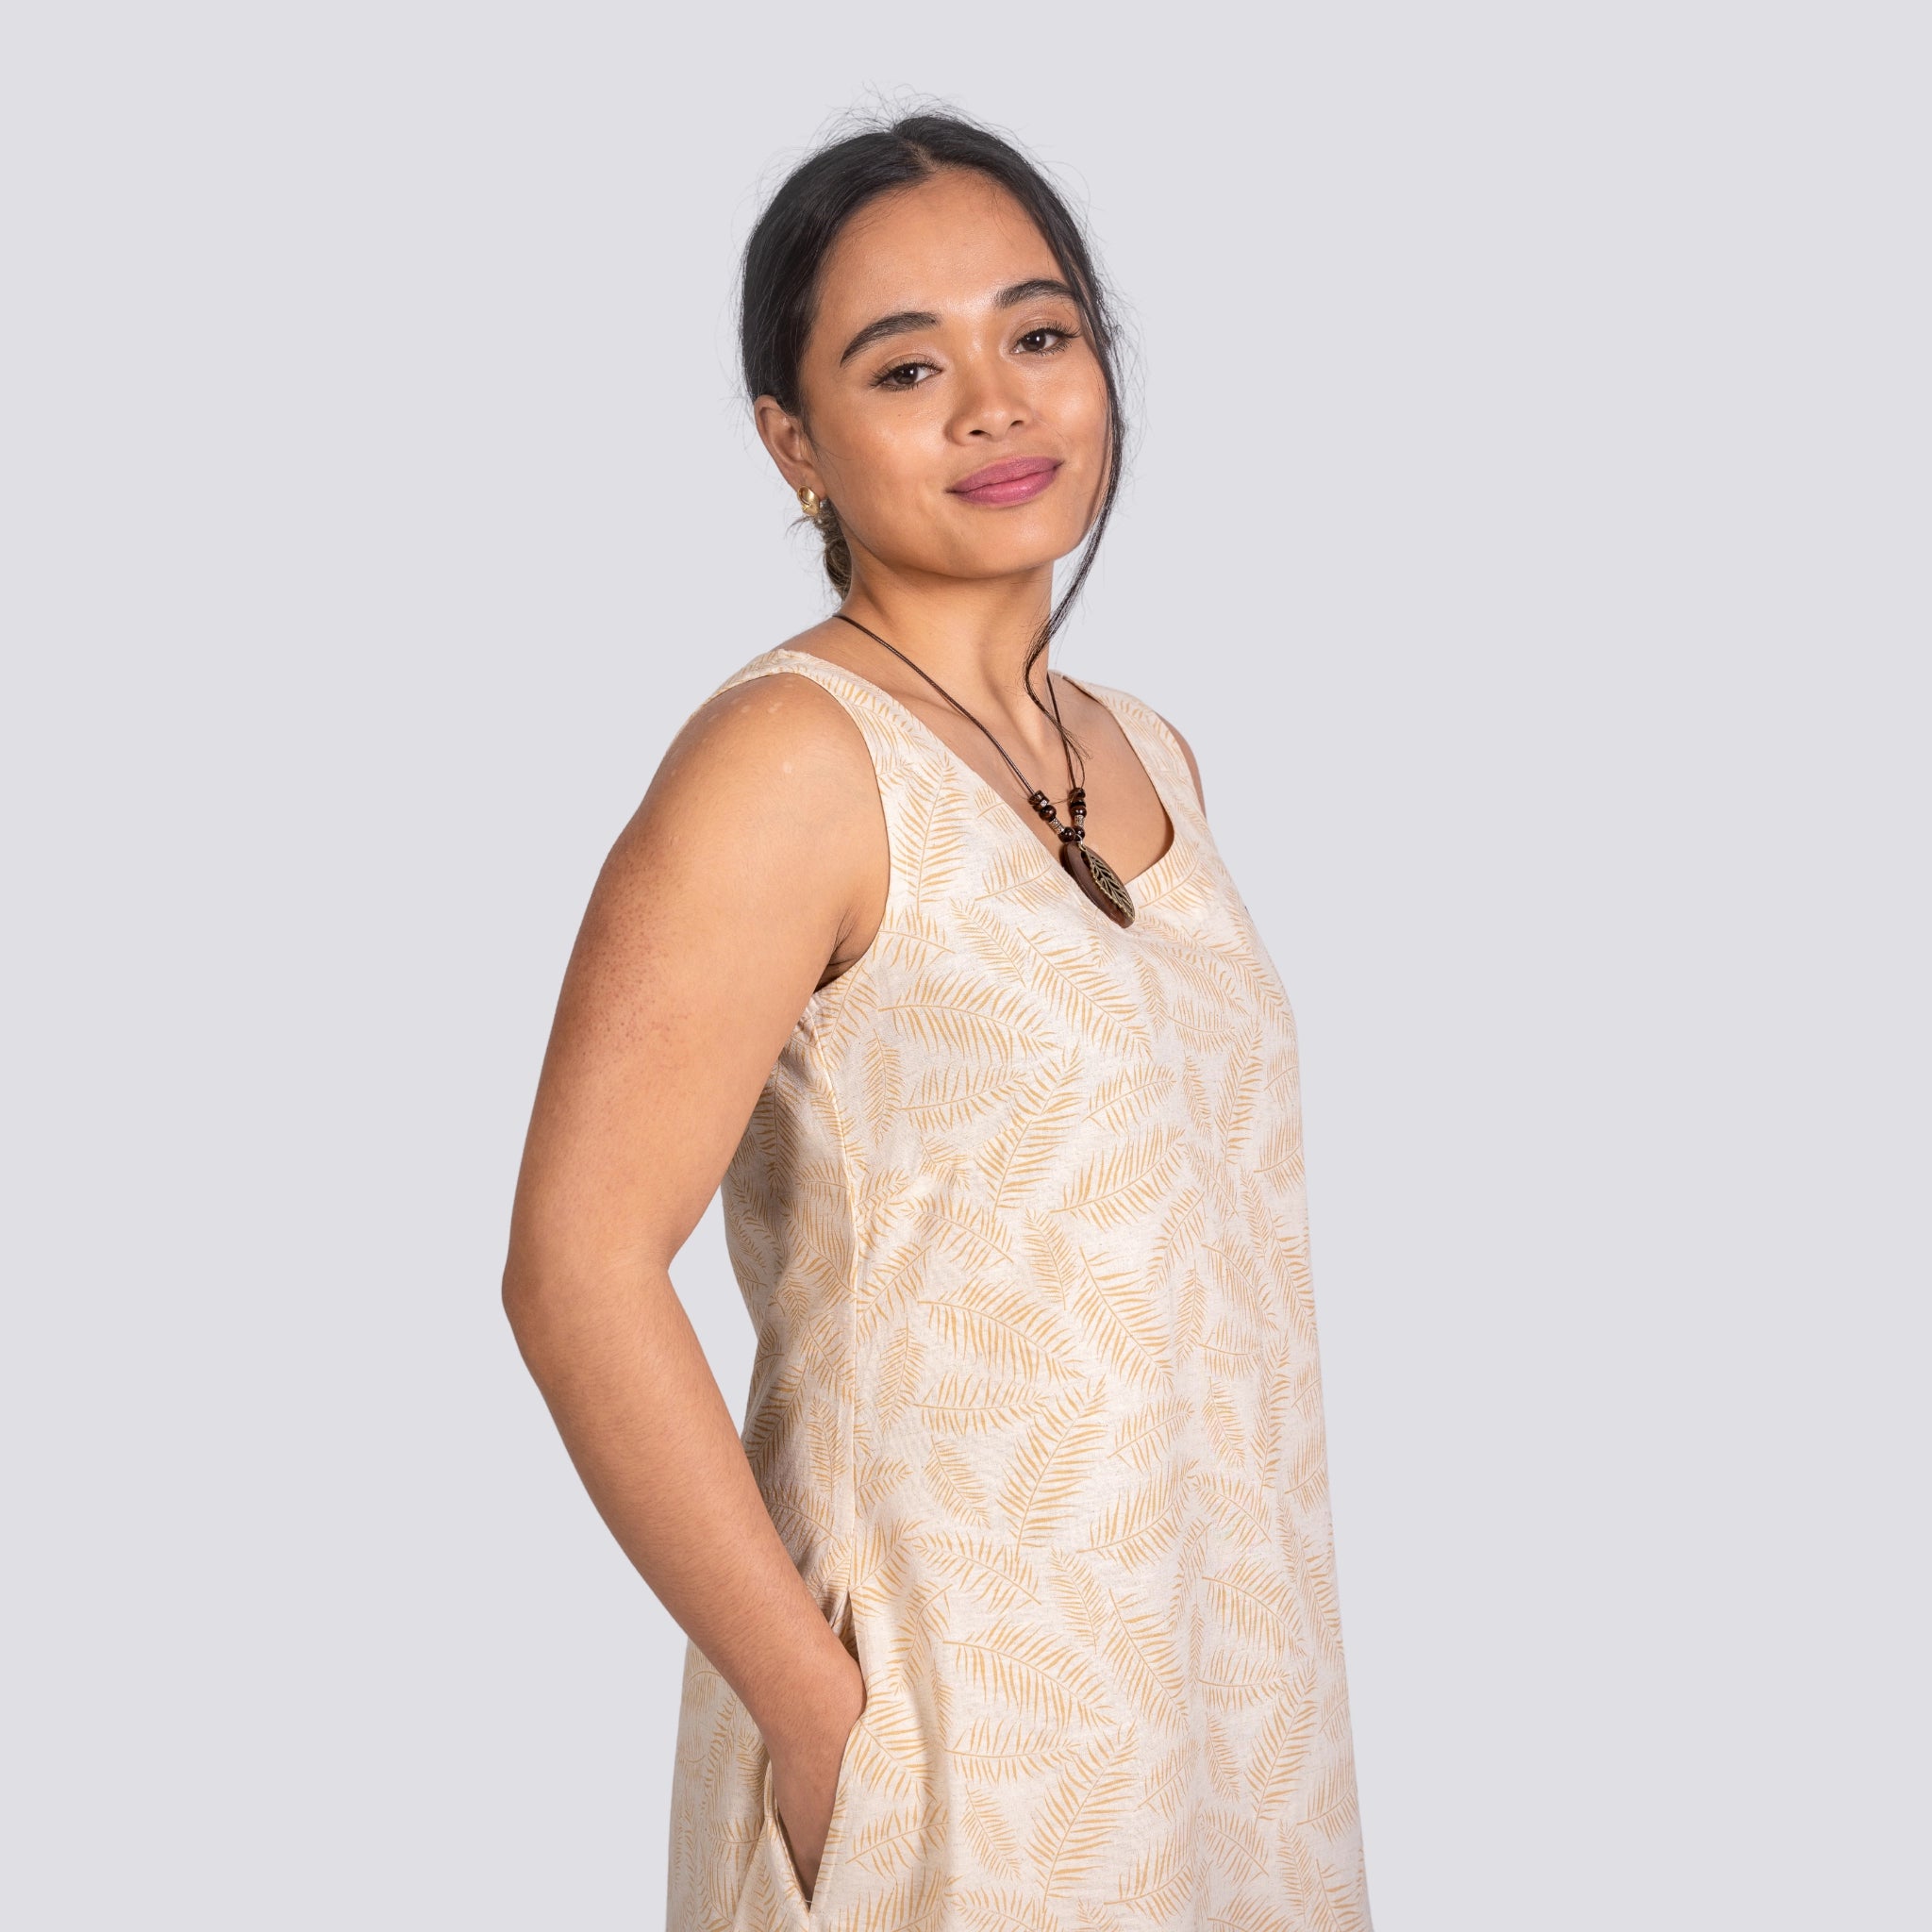 Young woman in a beige sleeveless U-neck Mystic Serenity High Low Linen Cotton Midi dress with Chino leaves print, smiling subtly at the camera, standing against a light gray background by Karee.